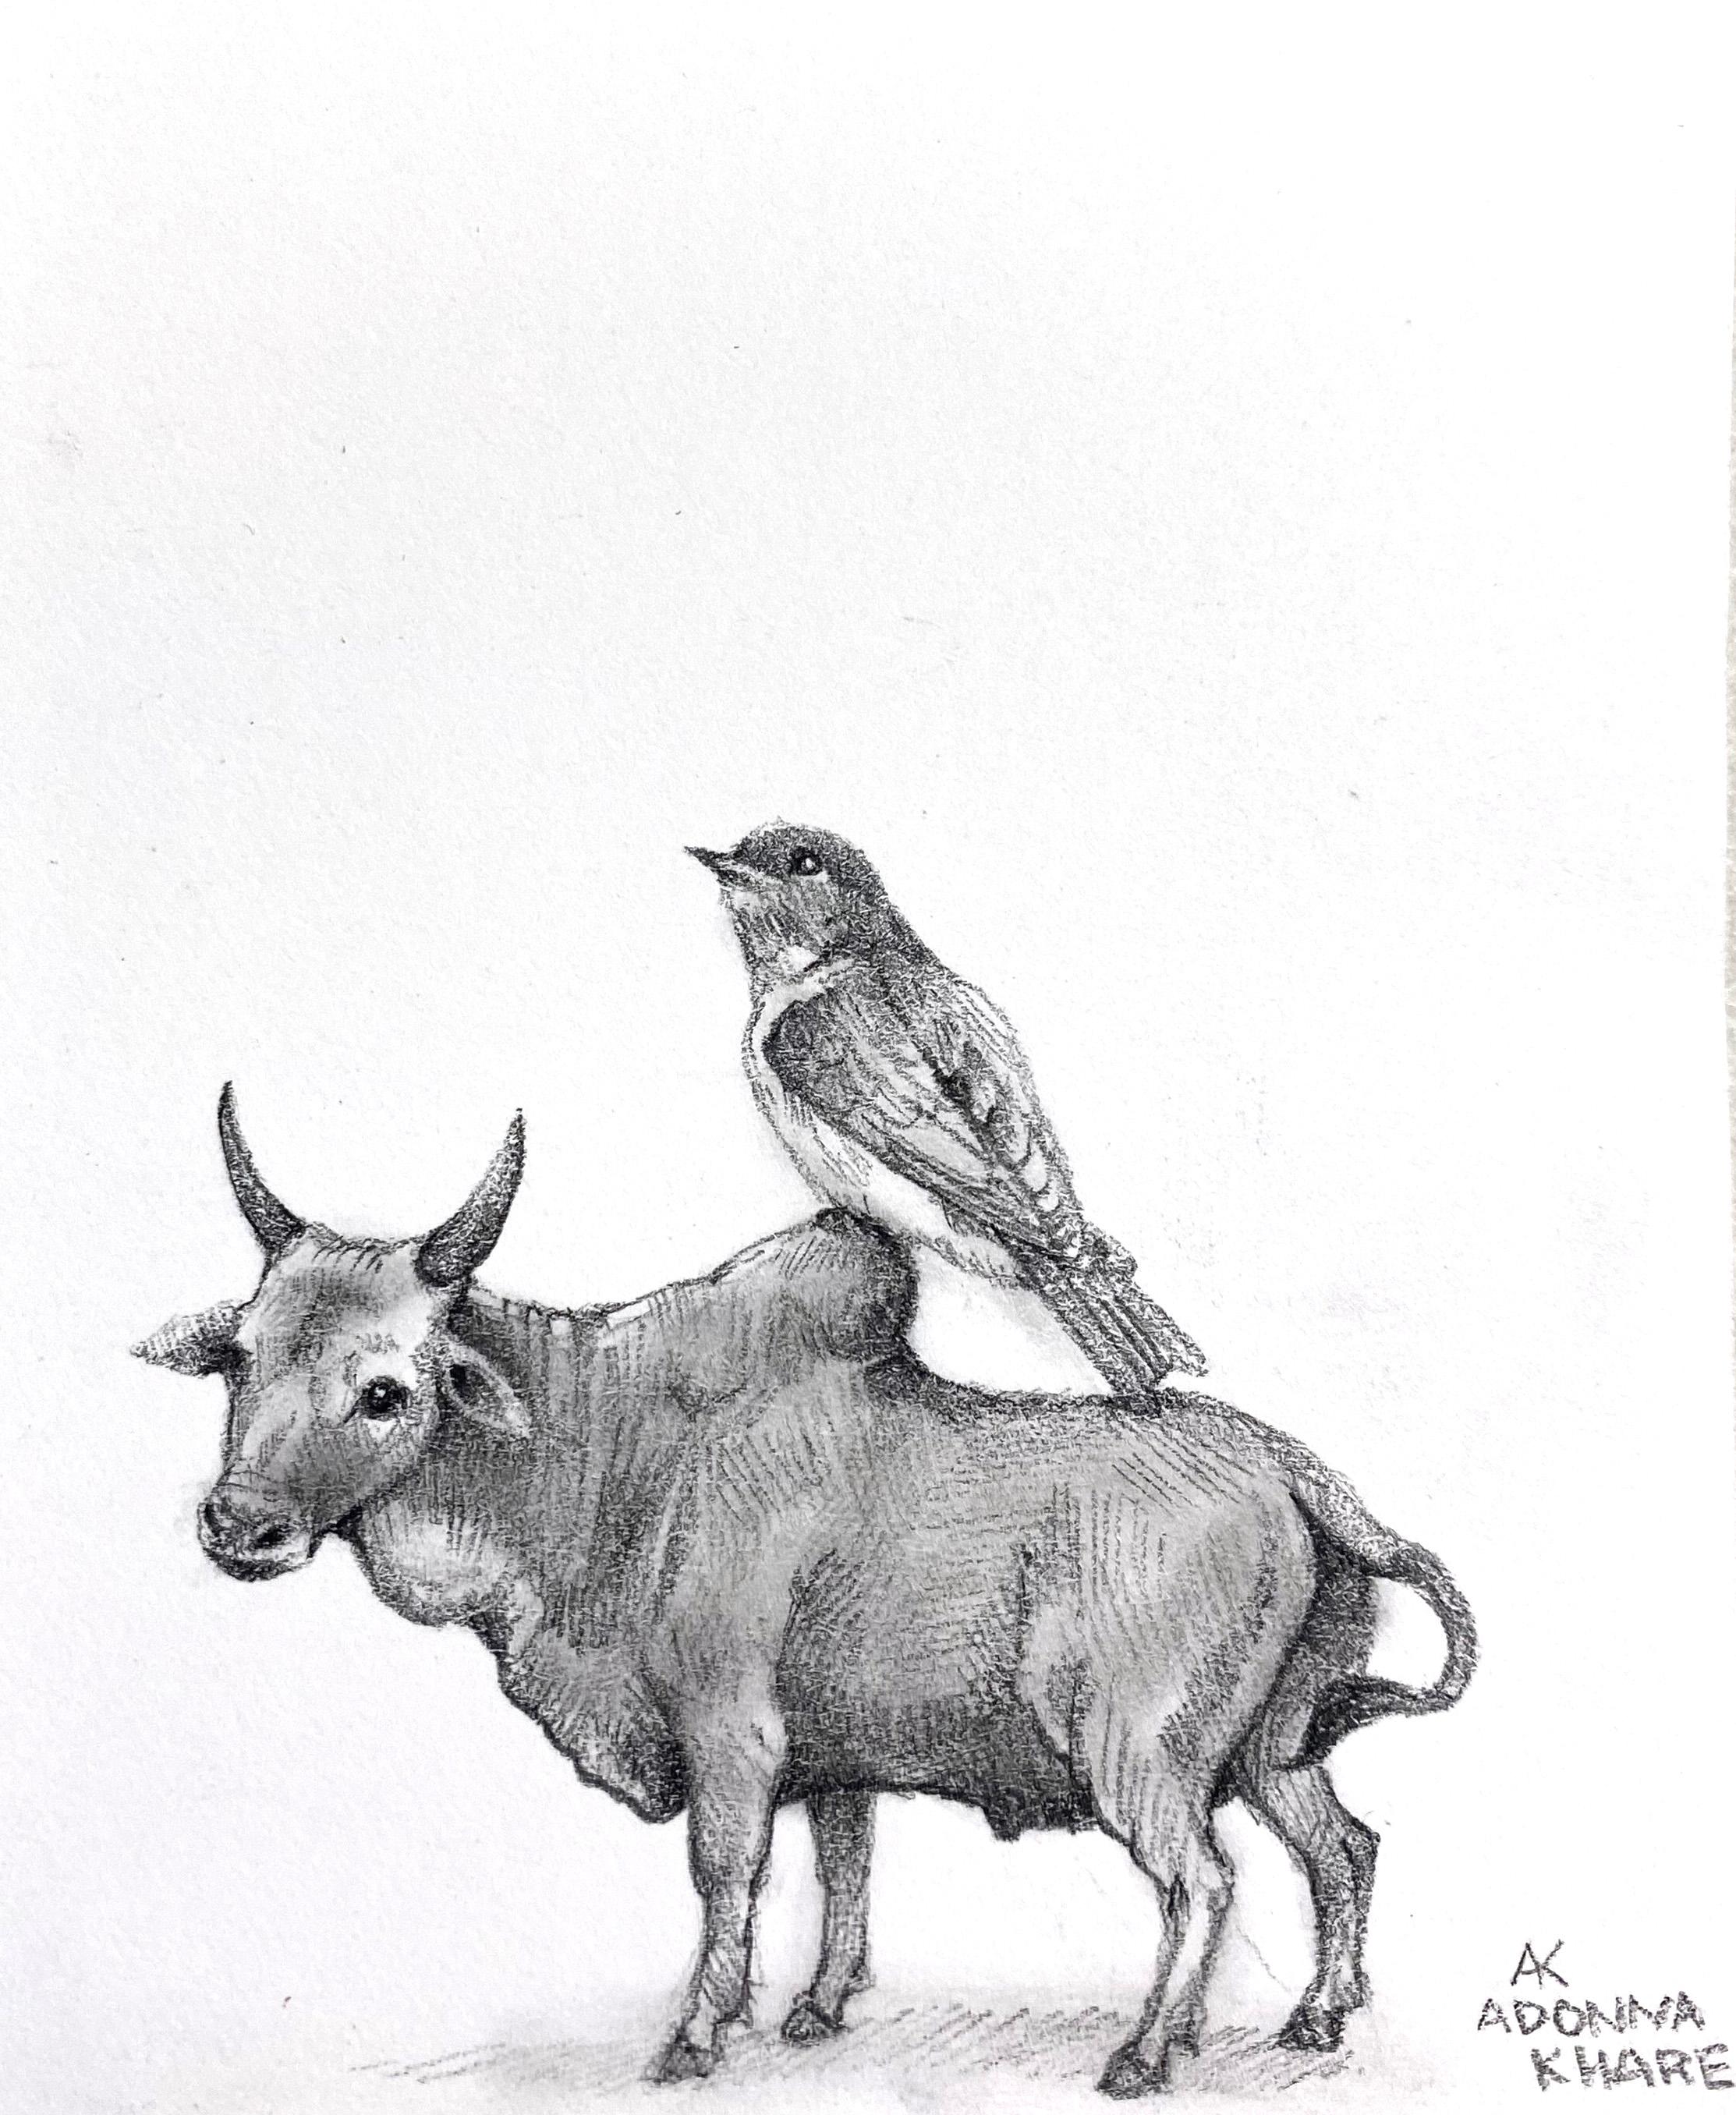 Adonna Khare Animal Art - Cow with Perched Bird